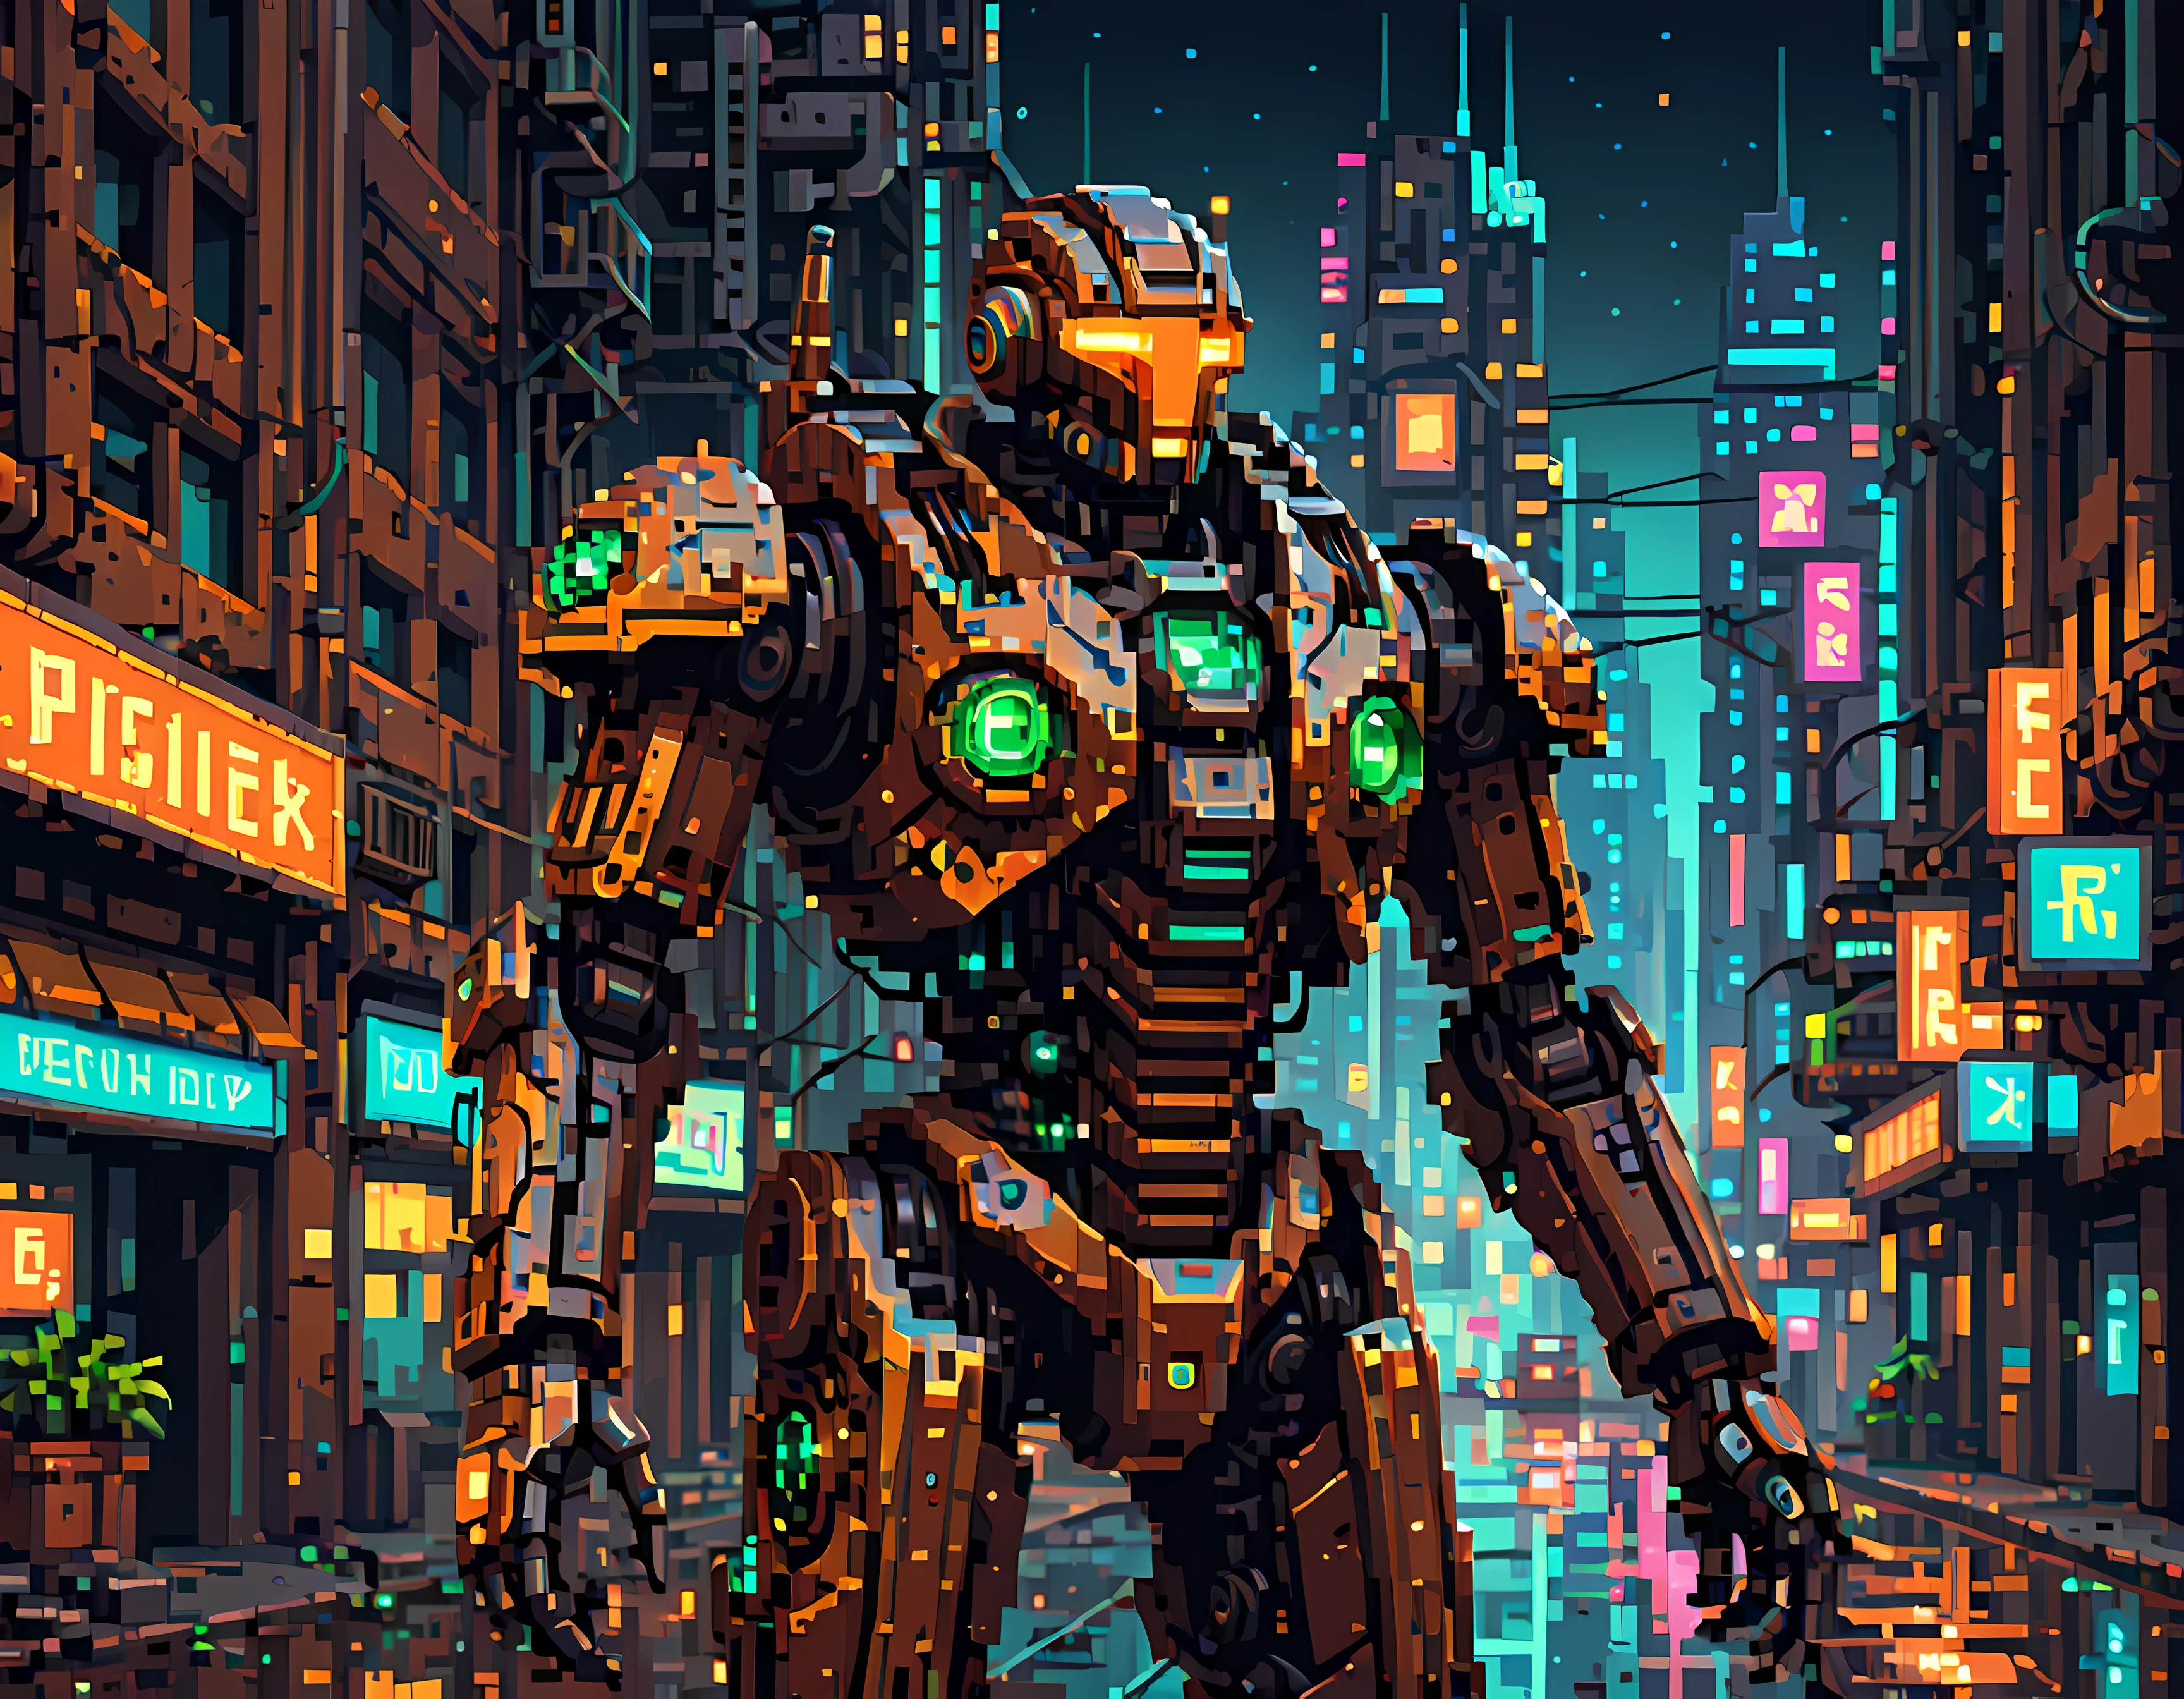 Pixel art, a vast mech graveyard under a starry moonlit sky, abandoned war machines lie in disrepair, battered and rusted, rows of broken mechs, nature intermingling with metal, a sense of melancholy and nostalgia, masterpiece in maximum 16K resolution, superb quality. | ((More_Detail))